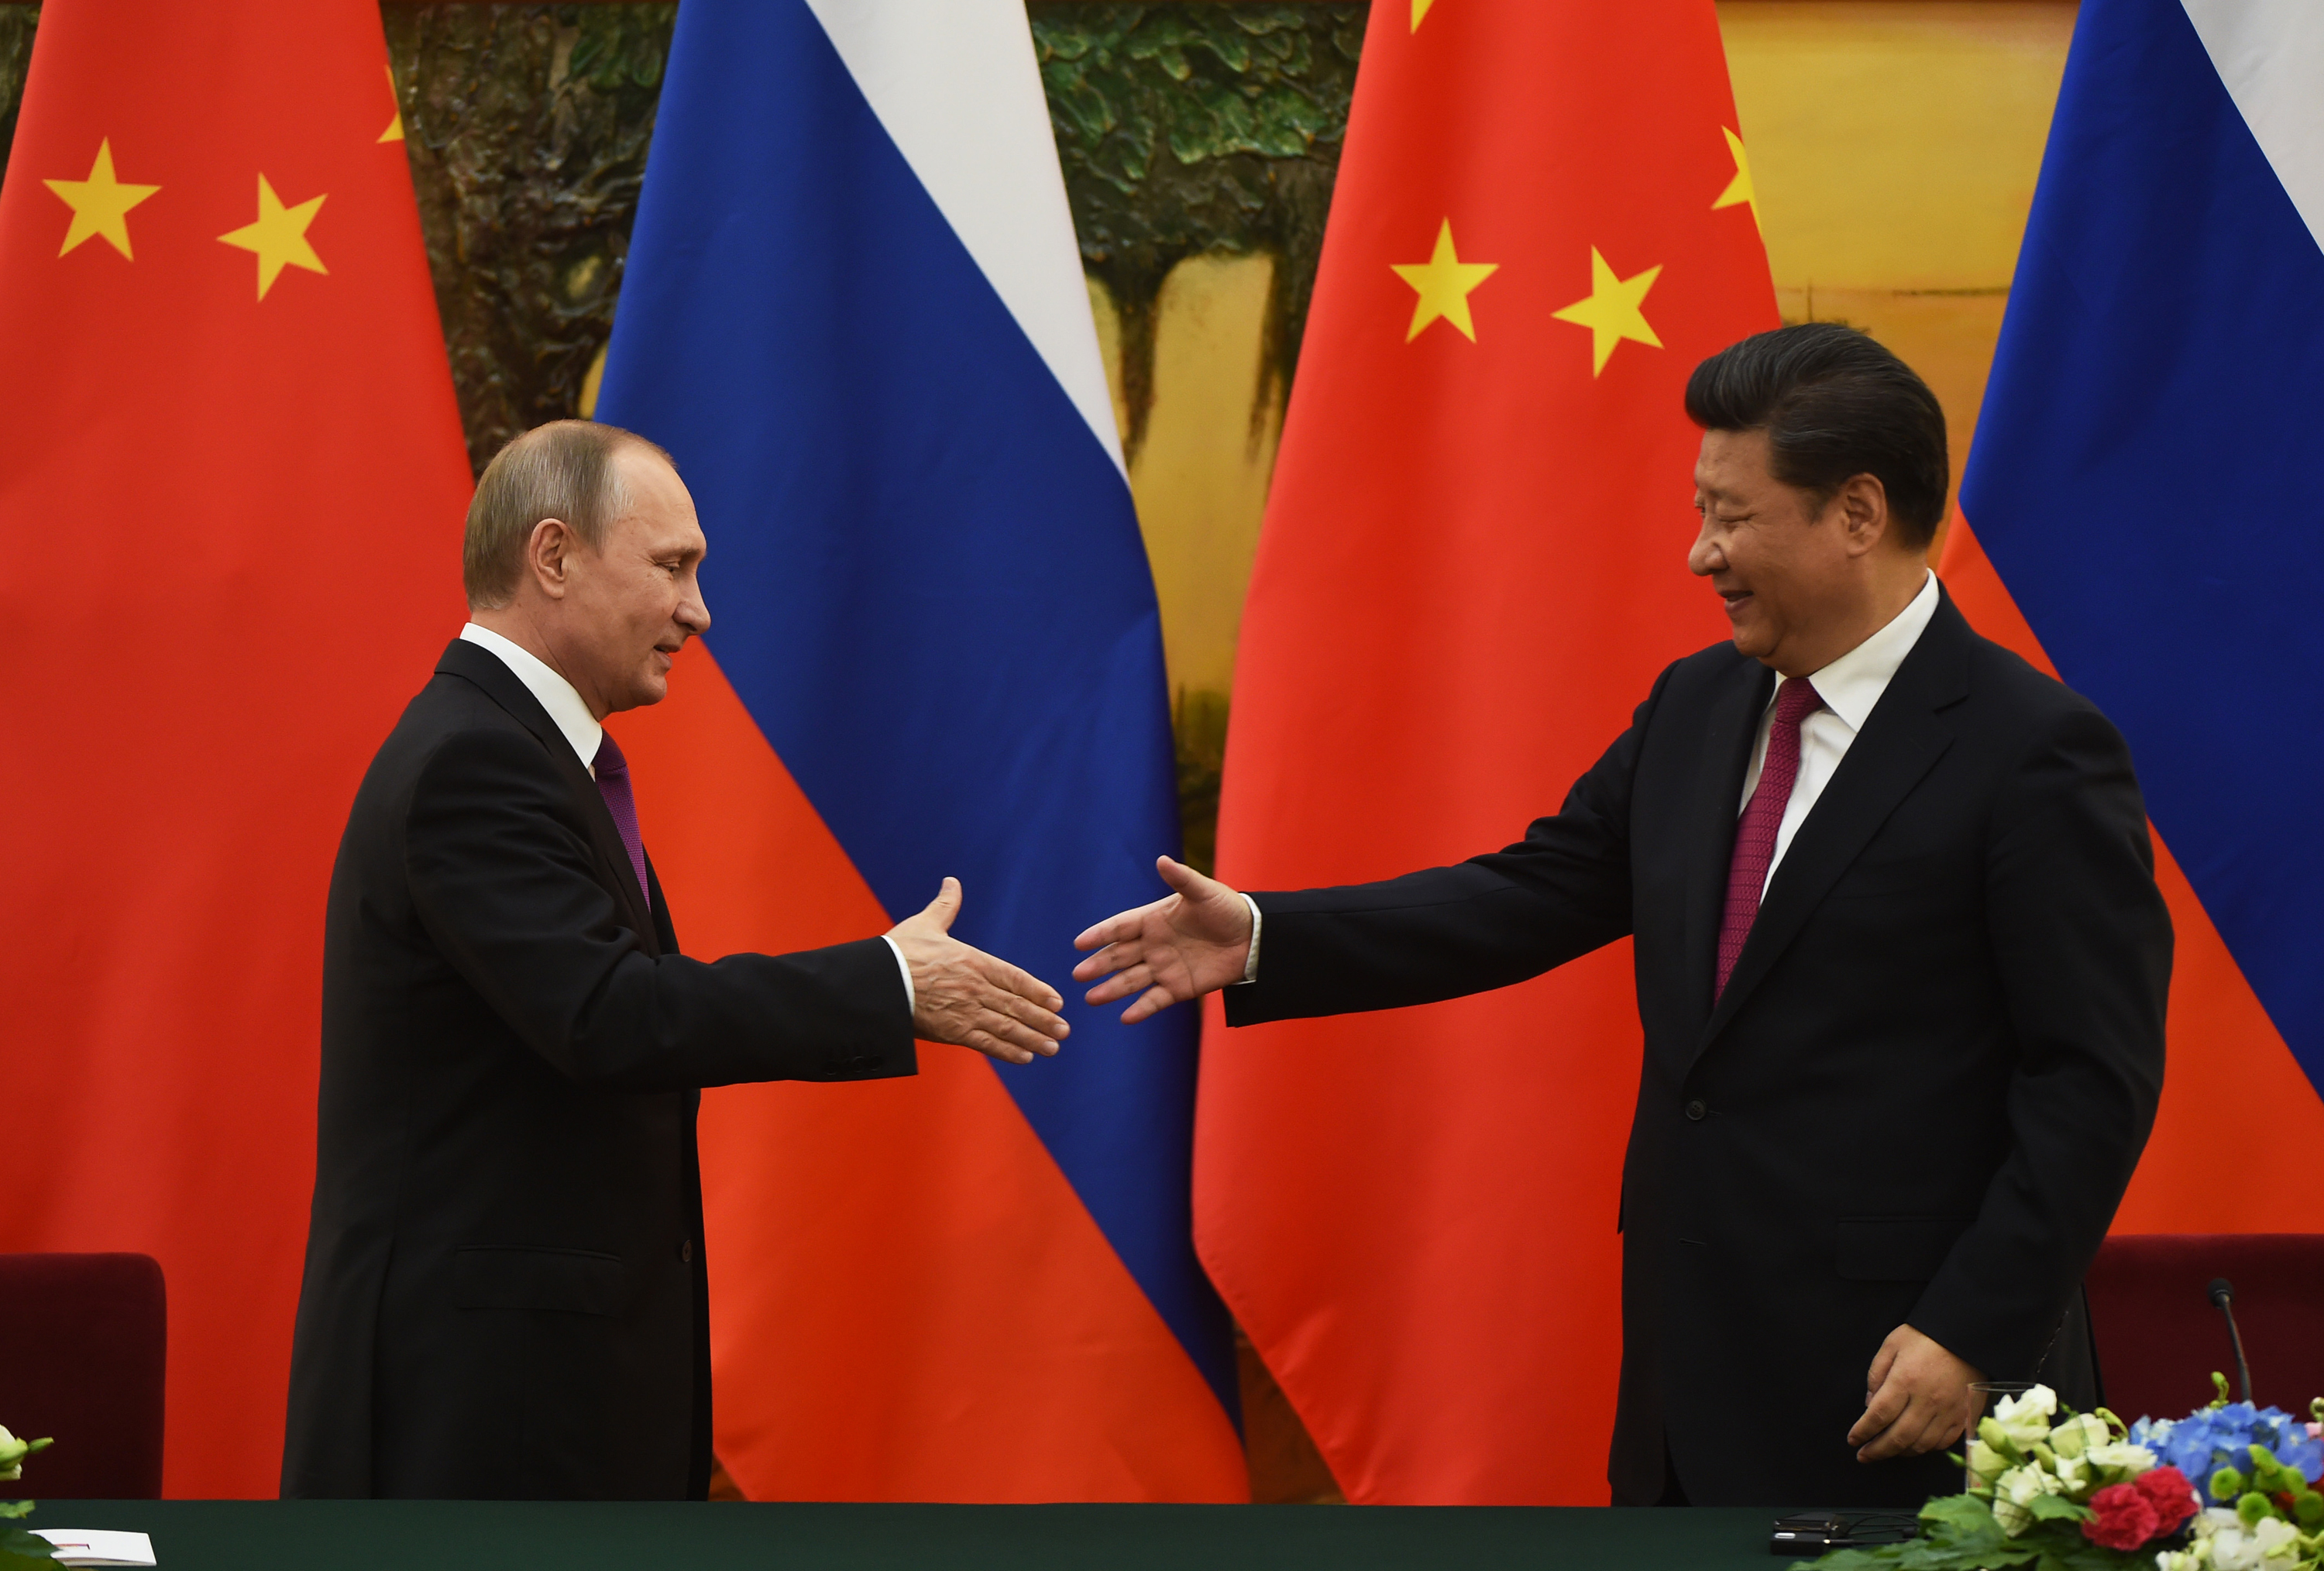 Russian President Vladimir Putin, left, shakes hands with Chinese President Xi Jinping